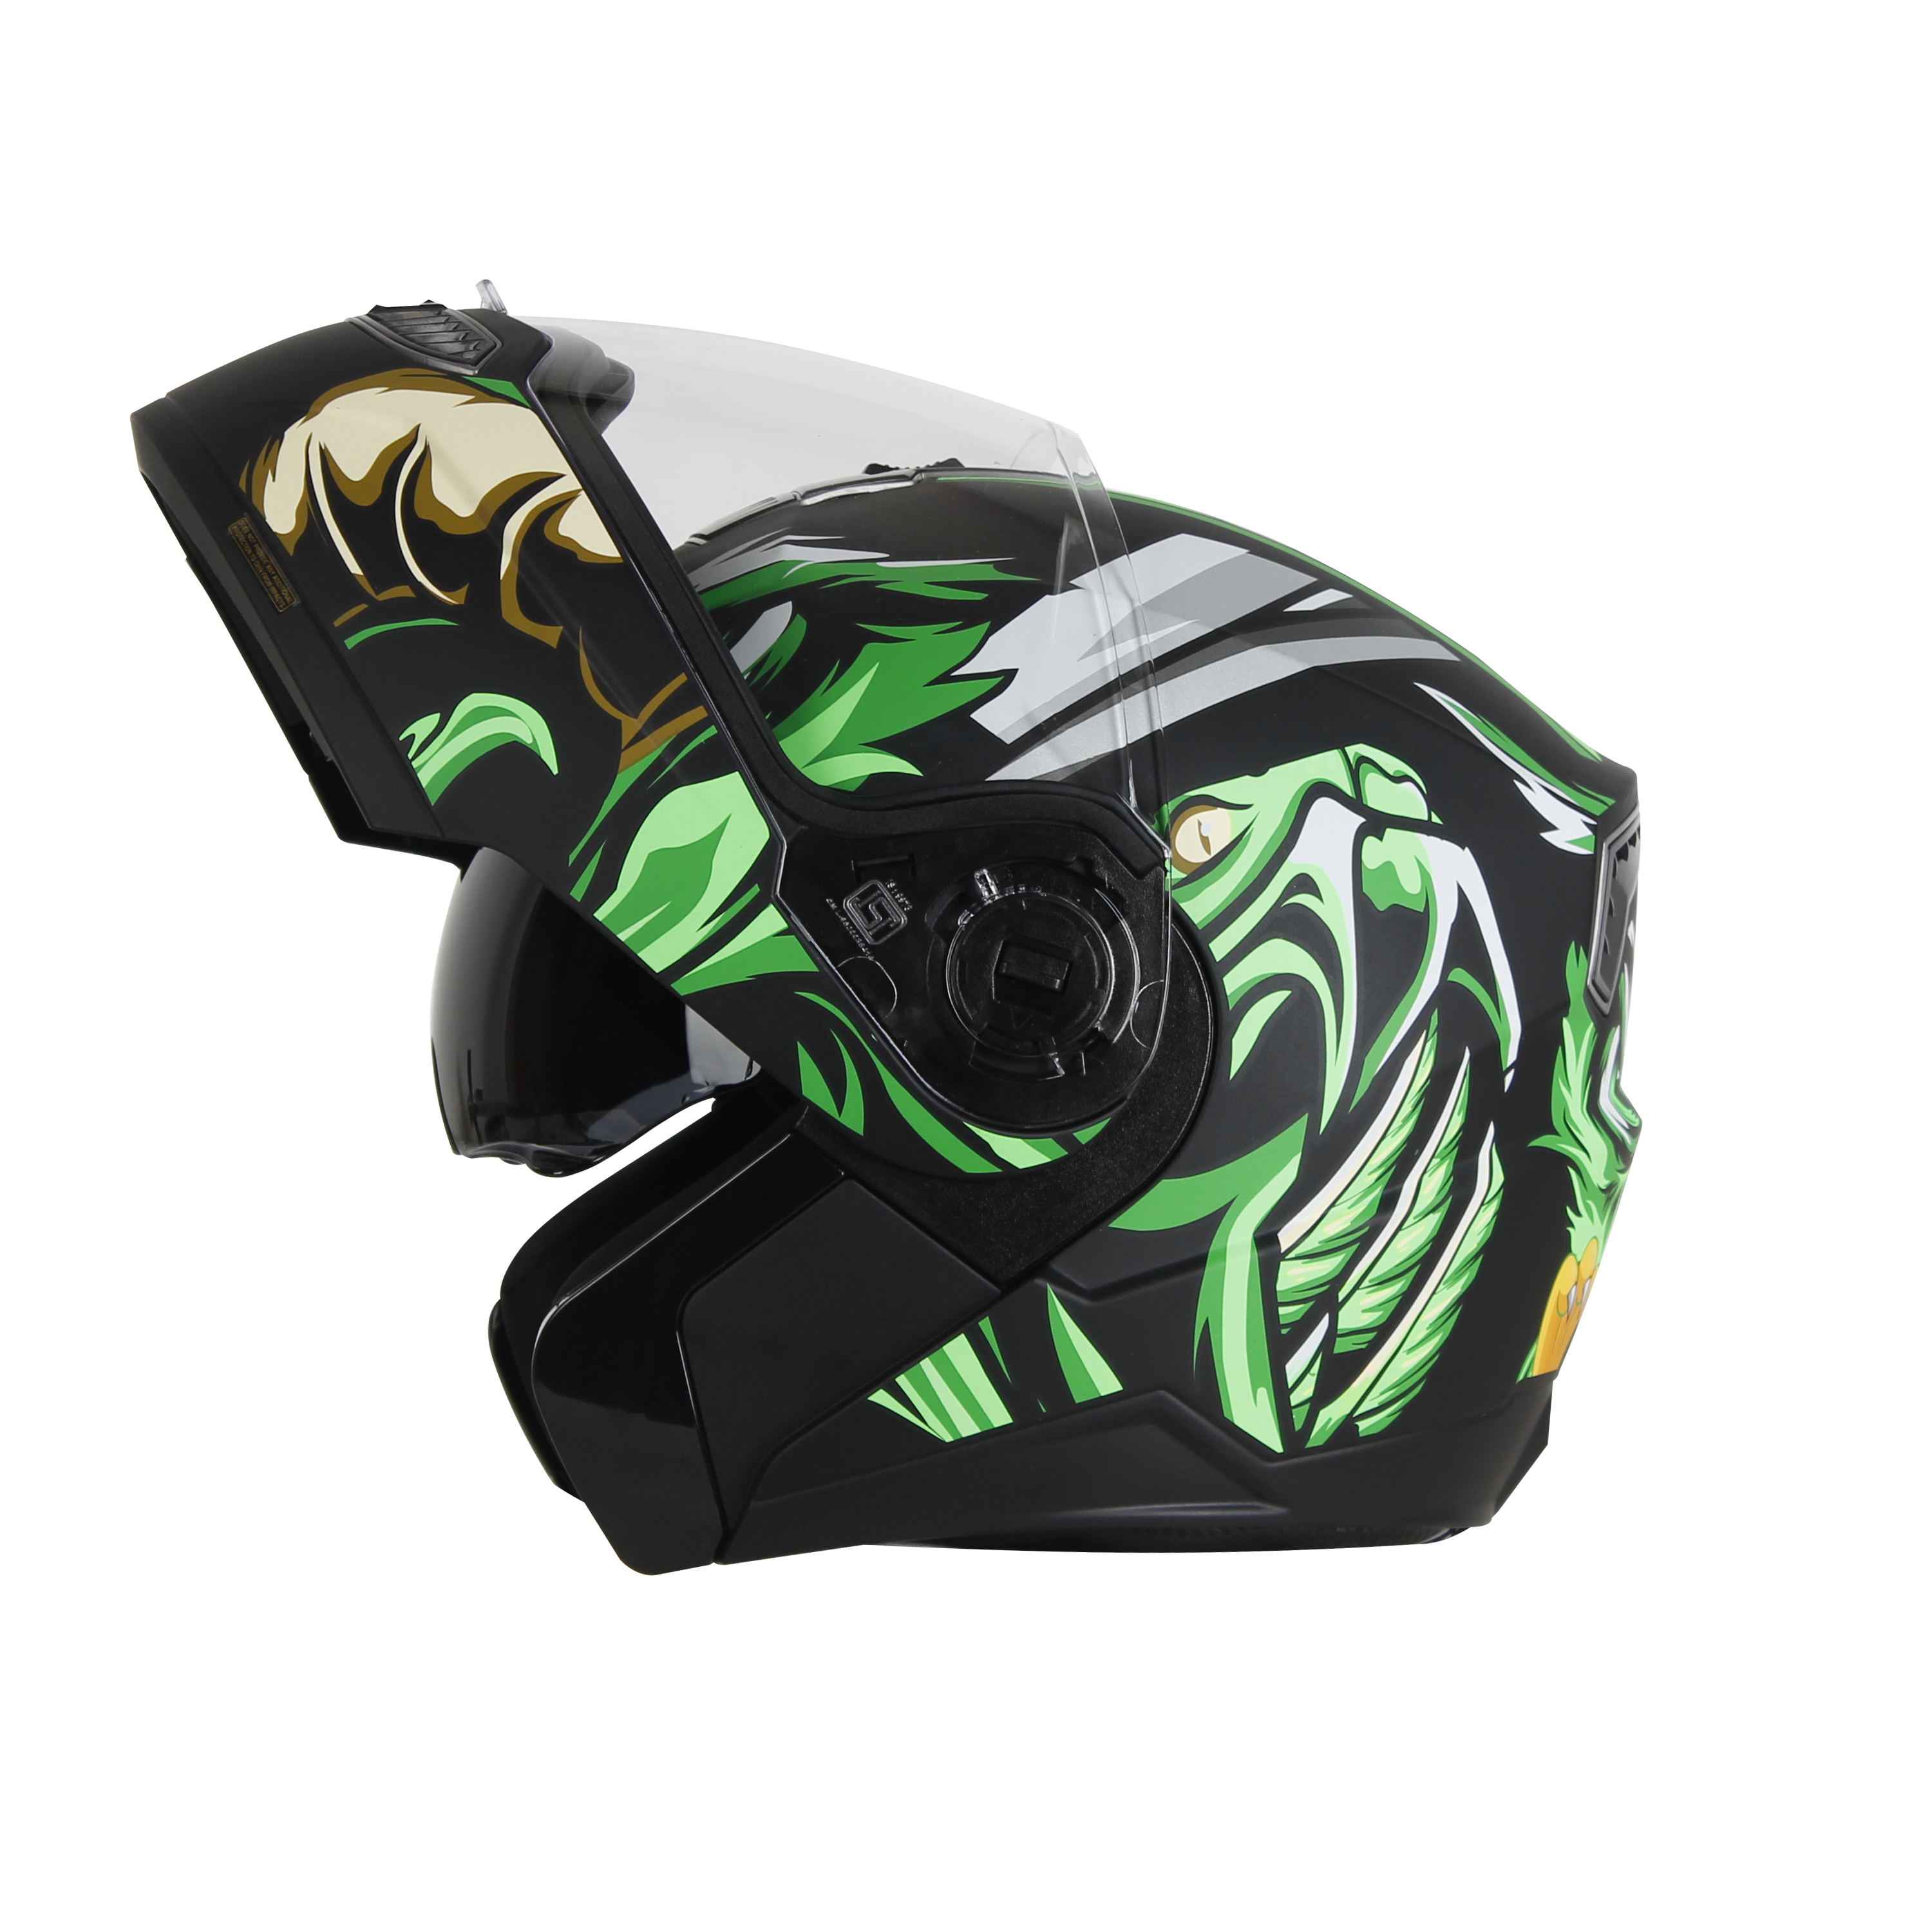 SBA-7 OWL FLIP UP GLOSSY BLACK WITH GREEN - ISS